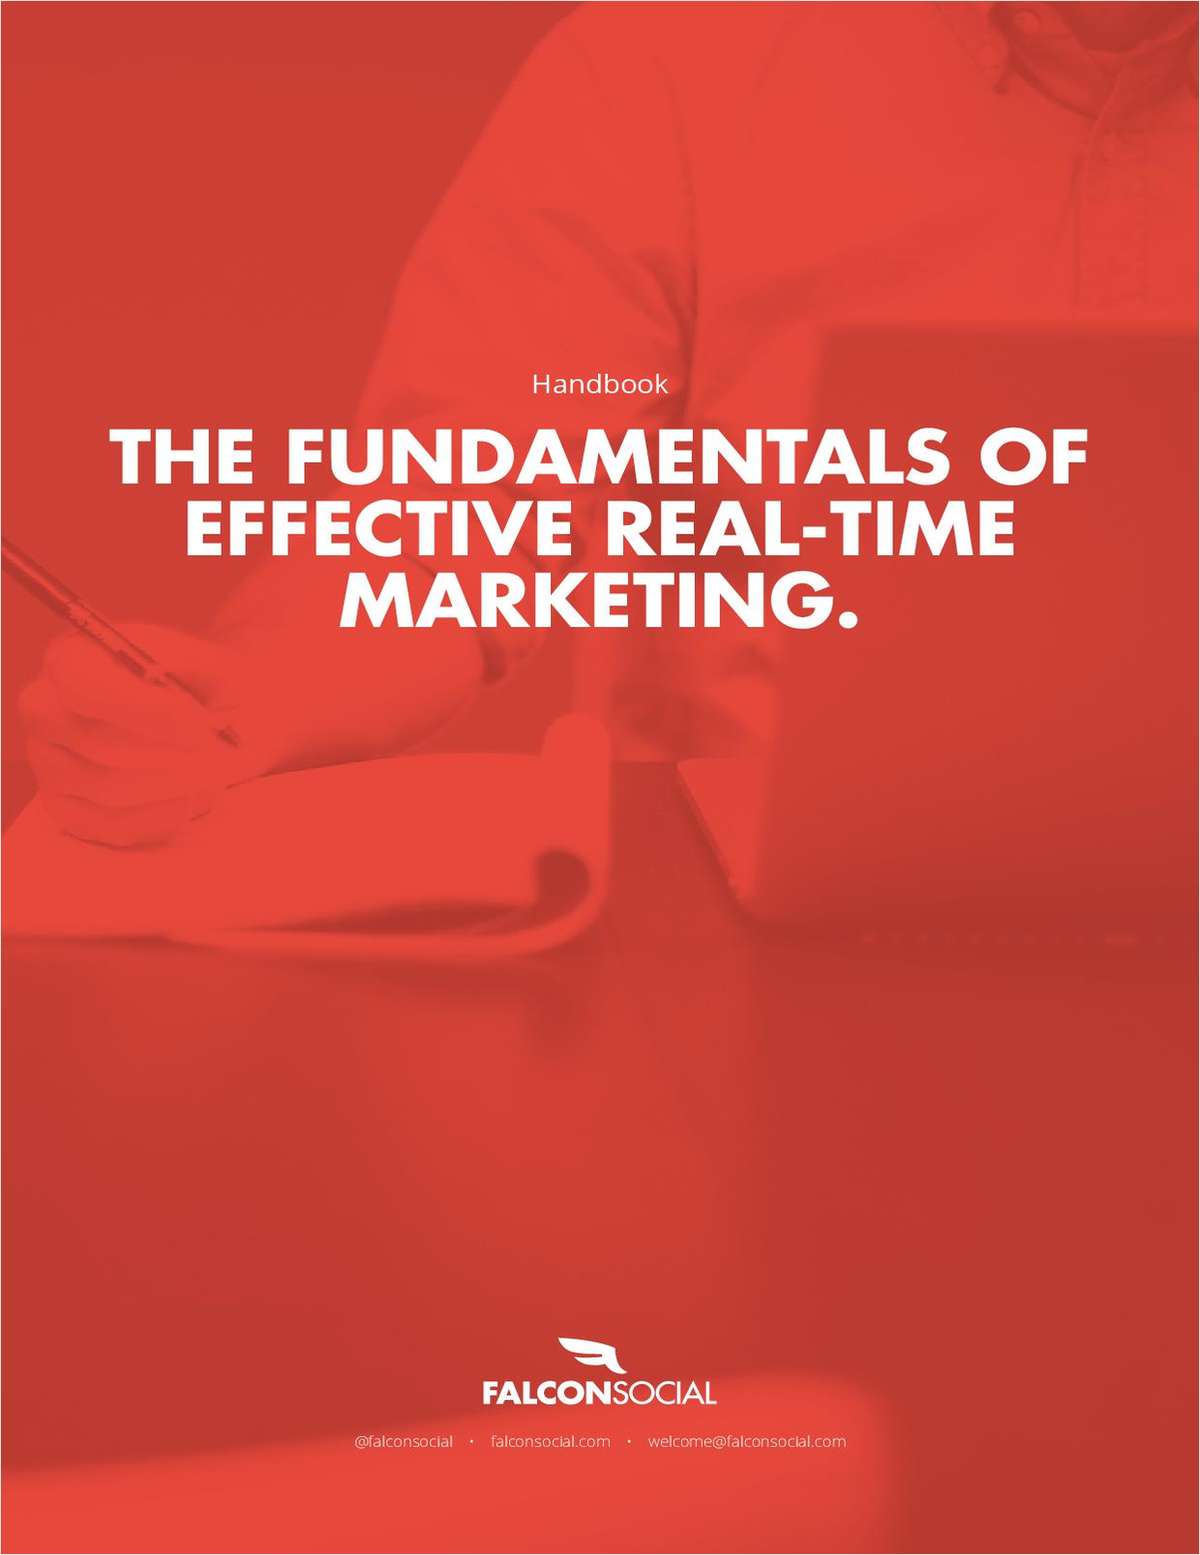 The Fundamentals of Effective Real-Time Marketing